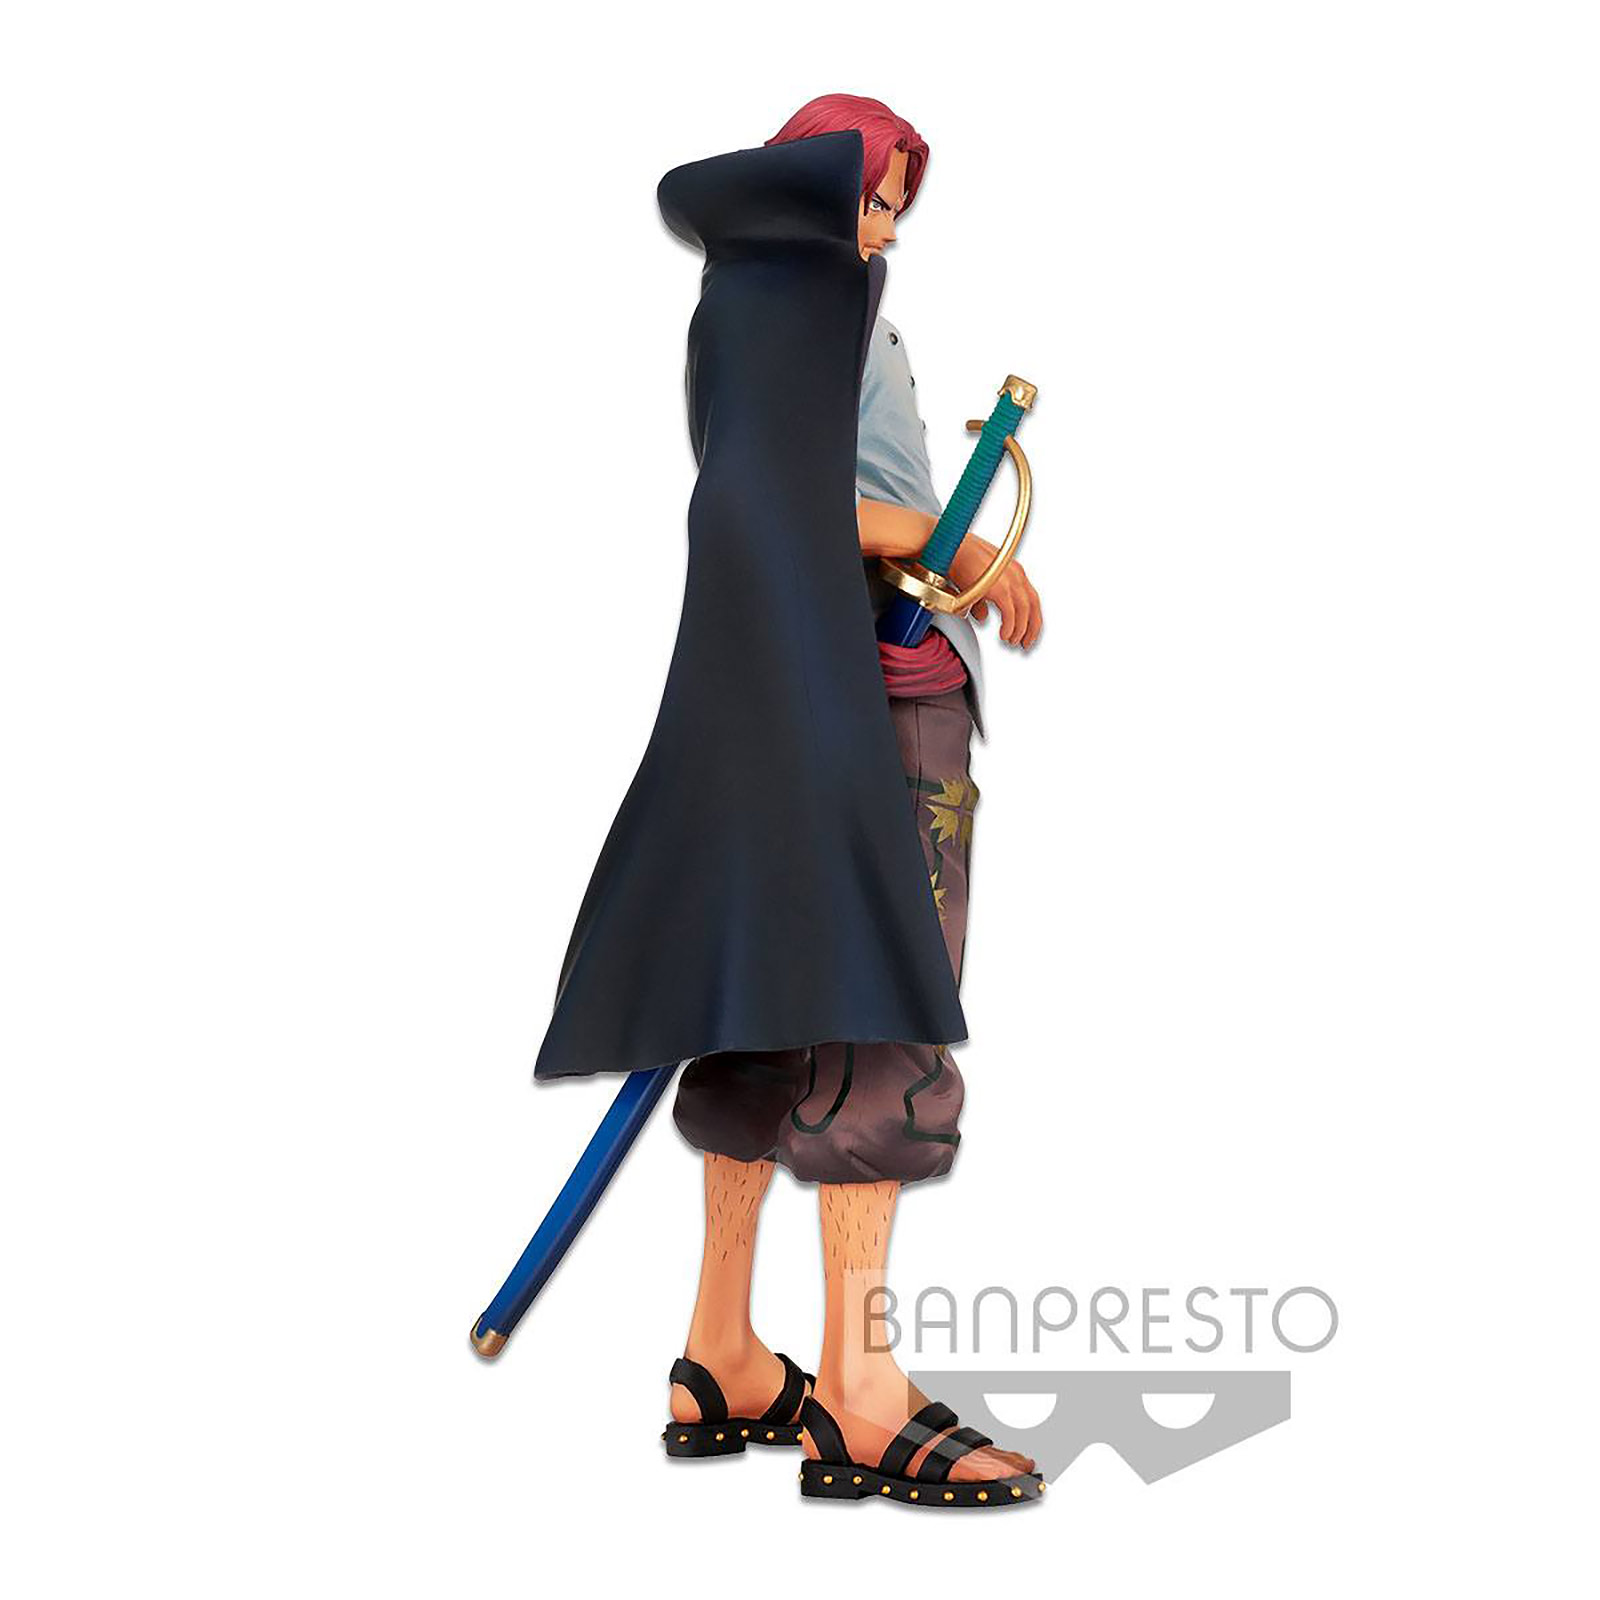 One Piece - The Shanks Figur